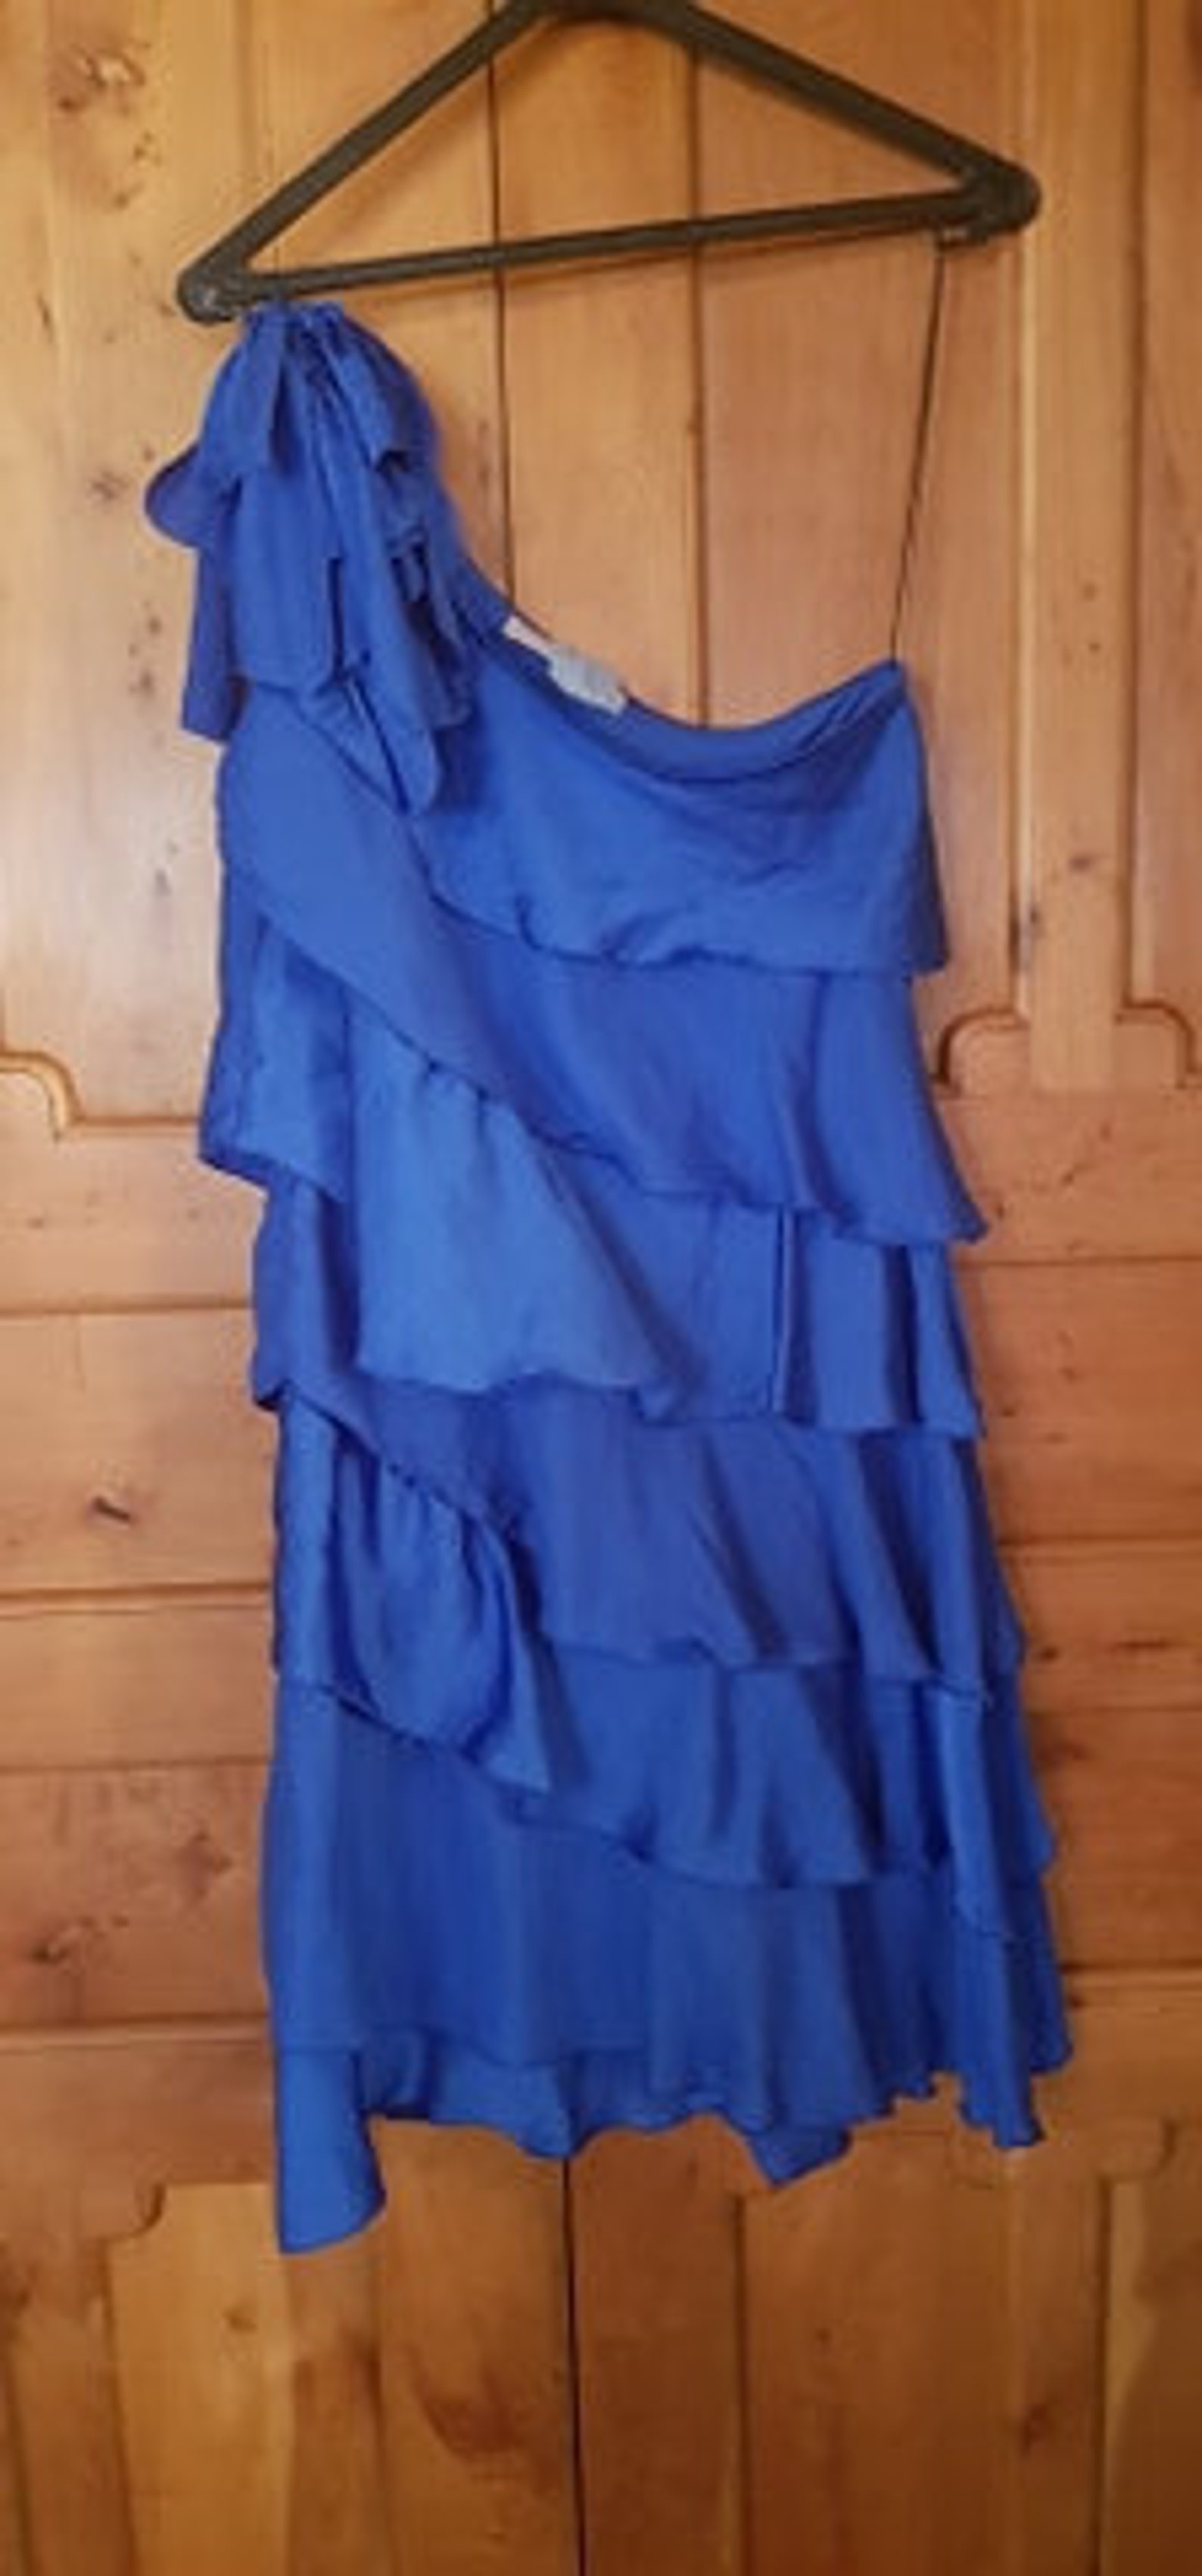 Electric Blue Cocktail dress | Etsy